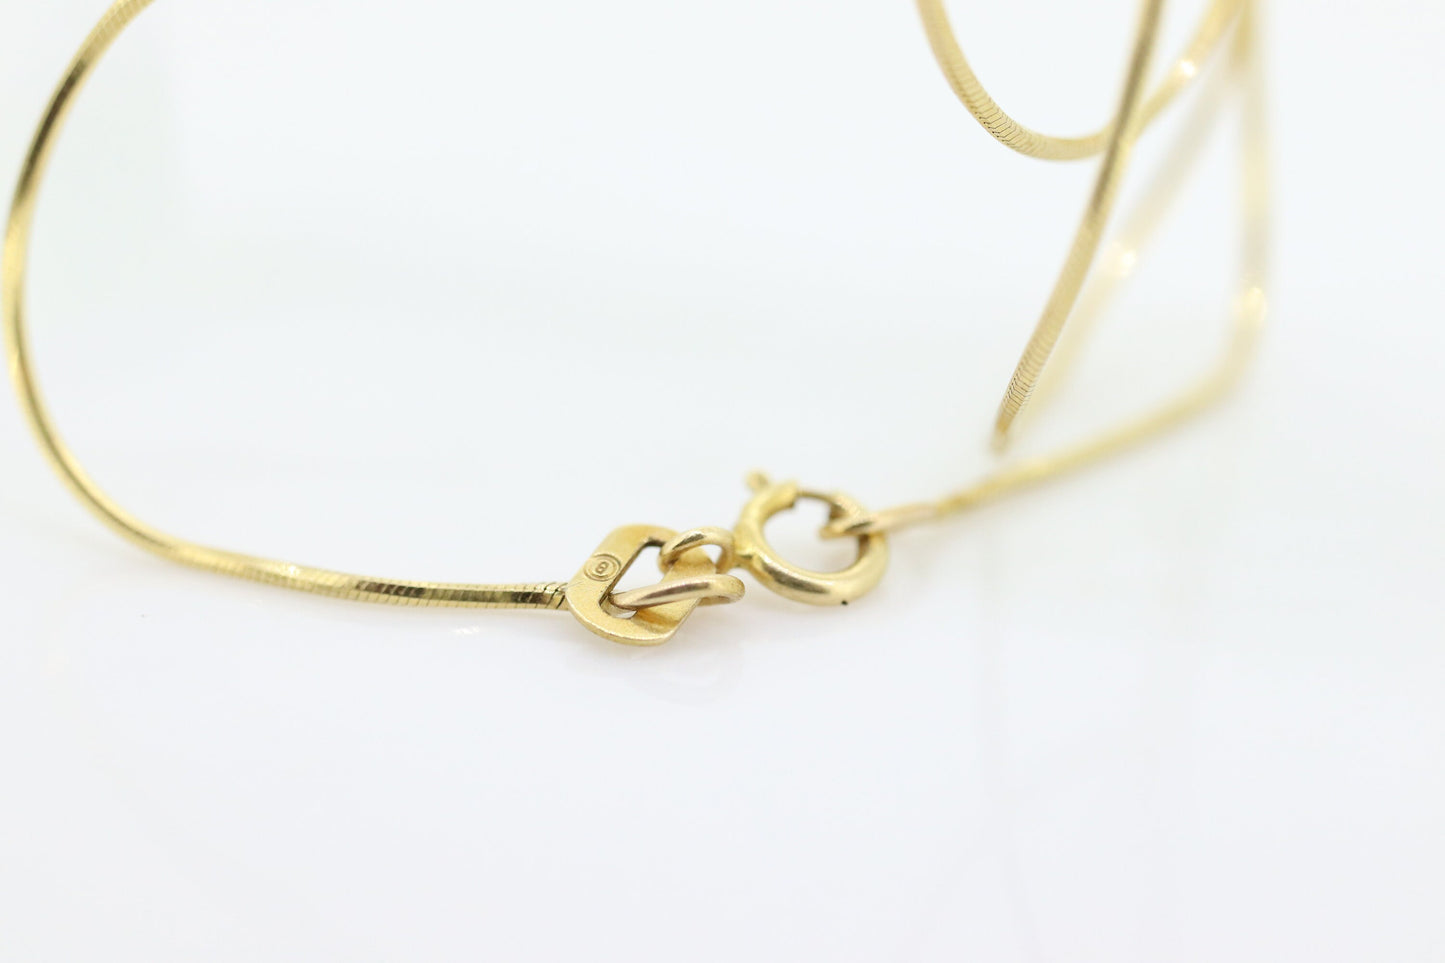 14k Round Omega  Necklace. 14k Yellow Gold OMEGA Snake chain Necklace. 1mm 16in length. st46